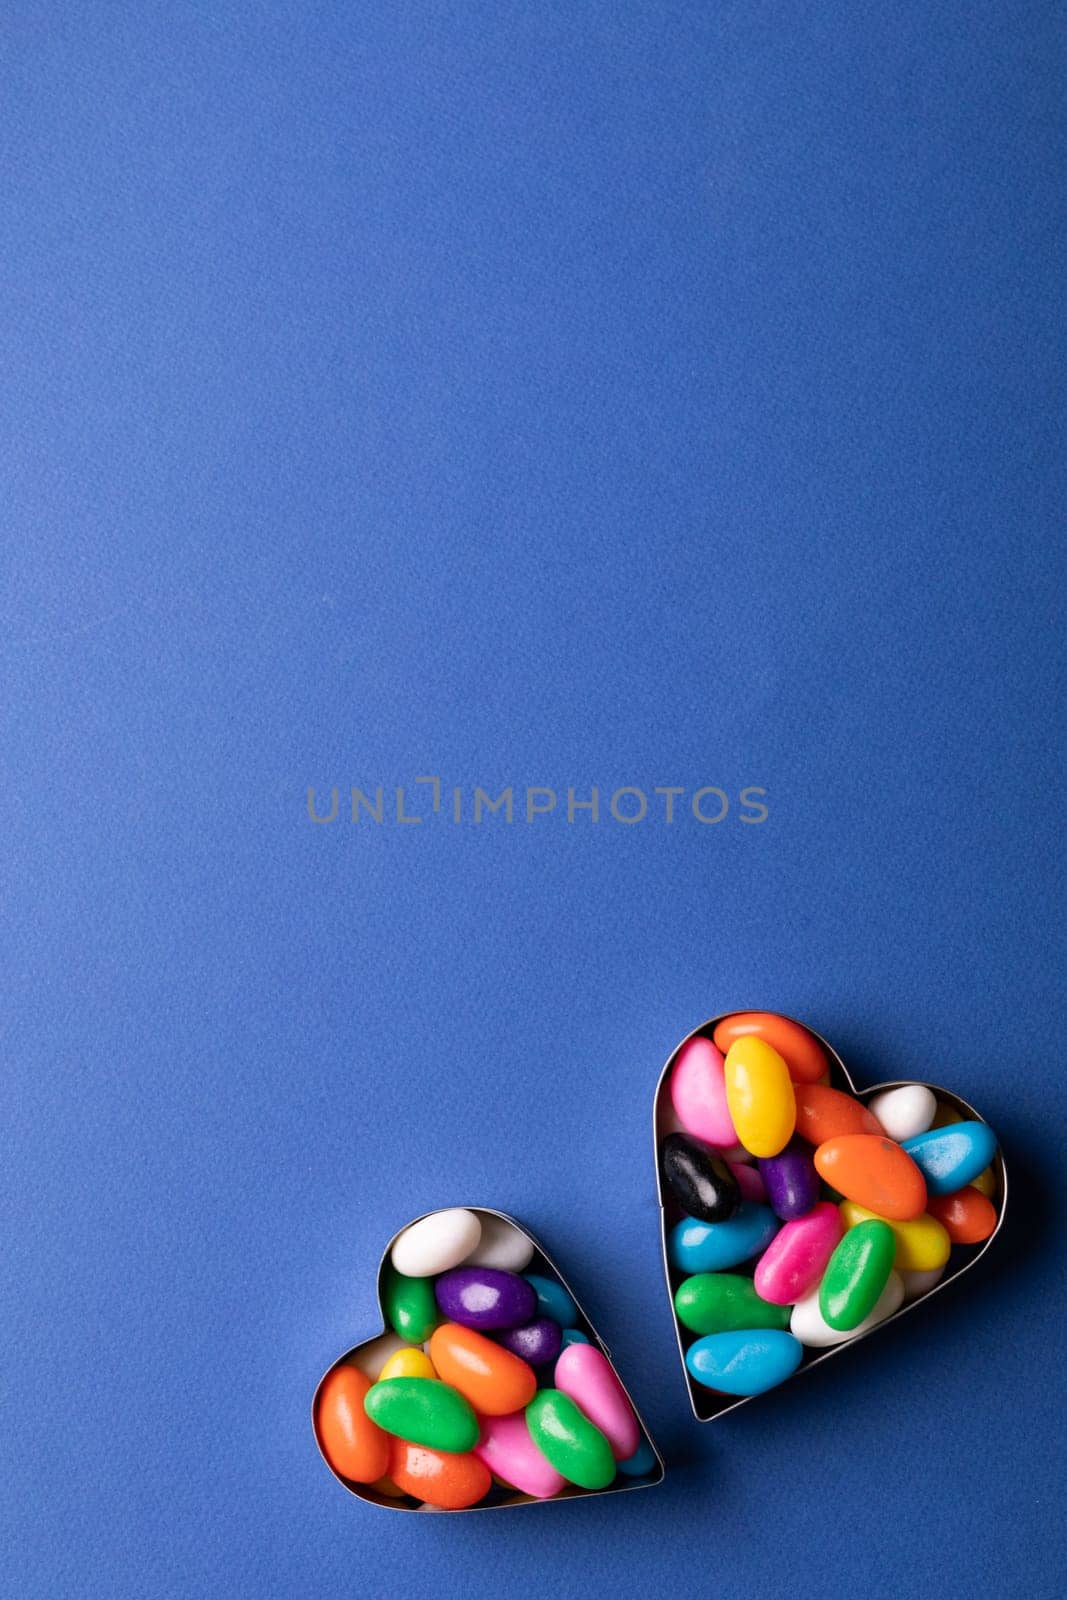 Overhead view of copy space above colorful candies in heart shape containers over blue background by Wavebreakmedia